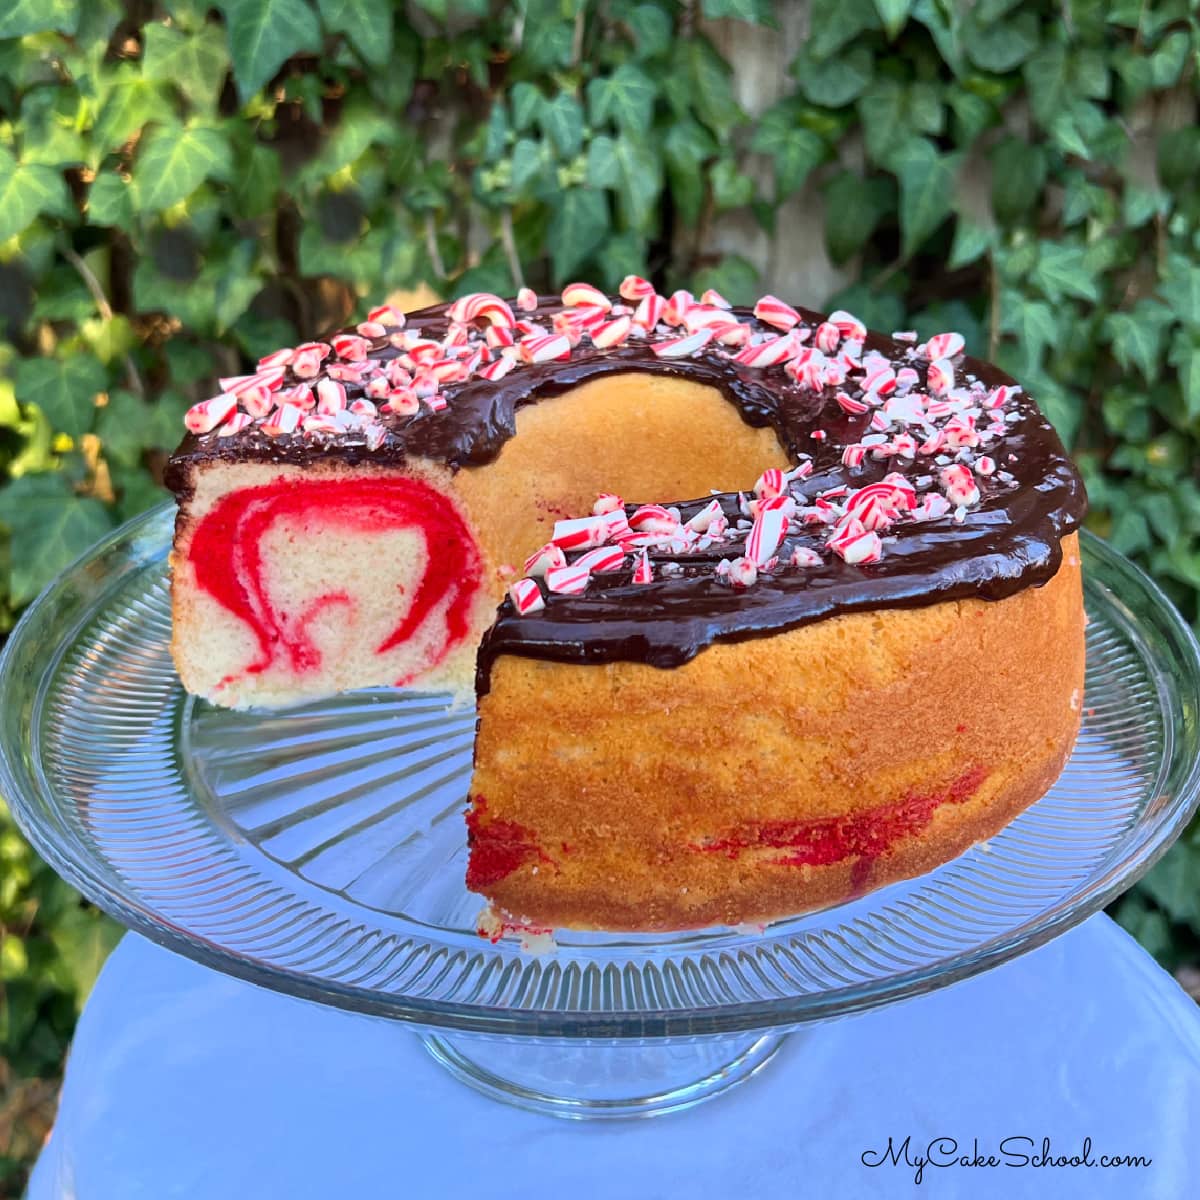 Sliced Peppermint Bundt Cake with red swirls. Topped with chocolate glaze and crushed candy canes.